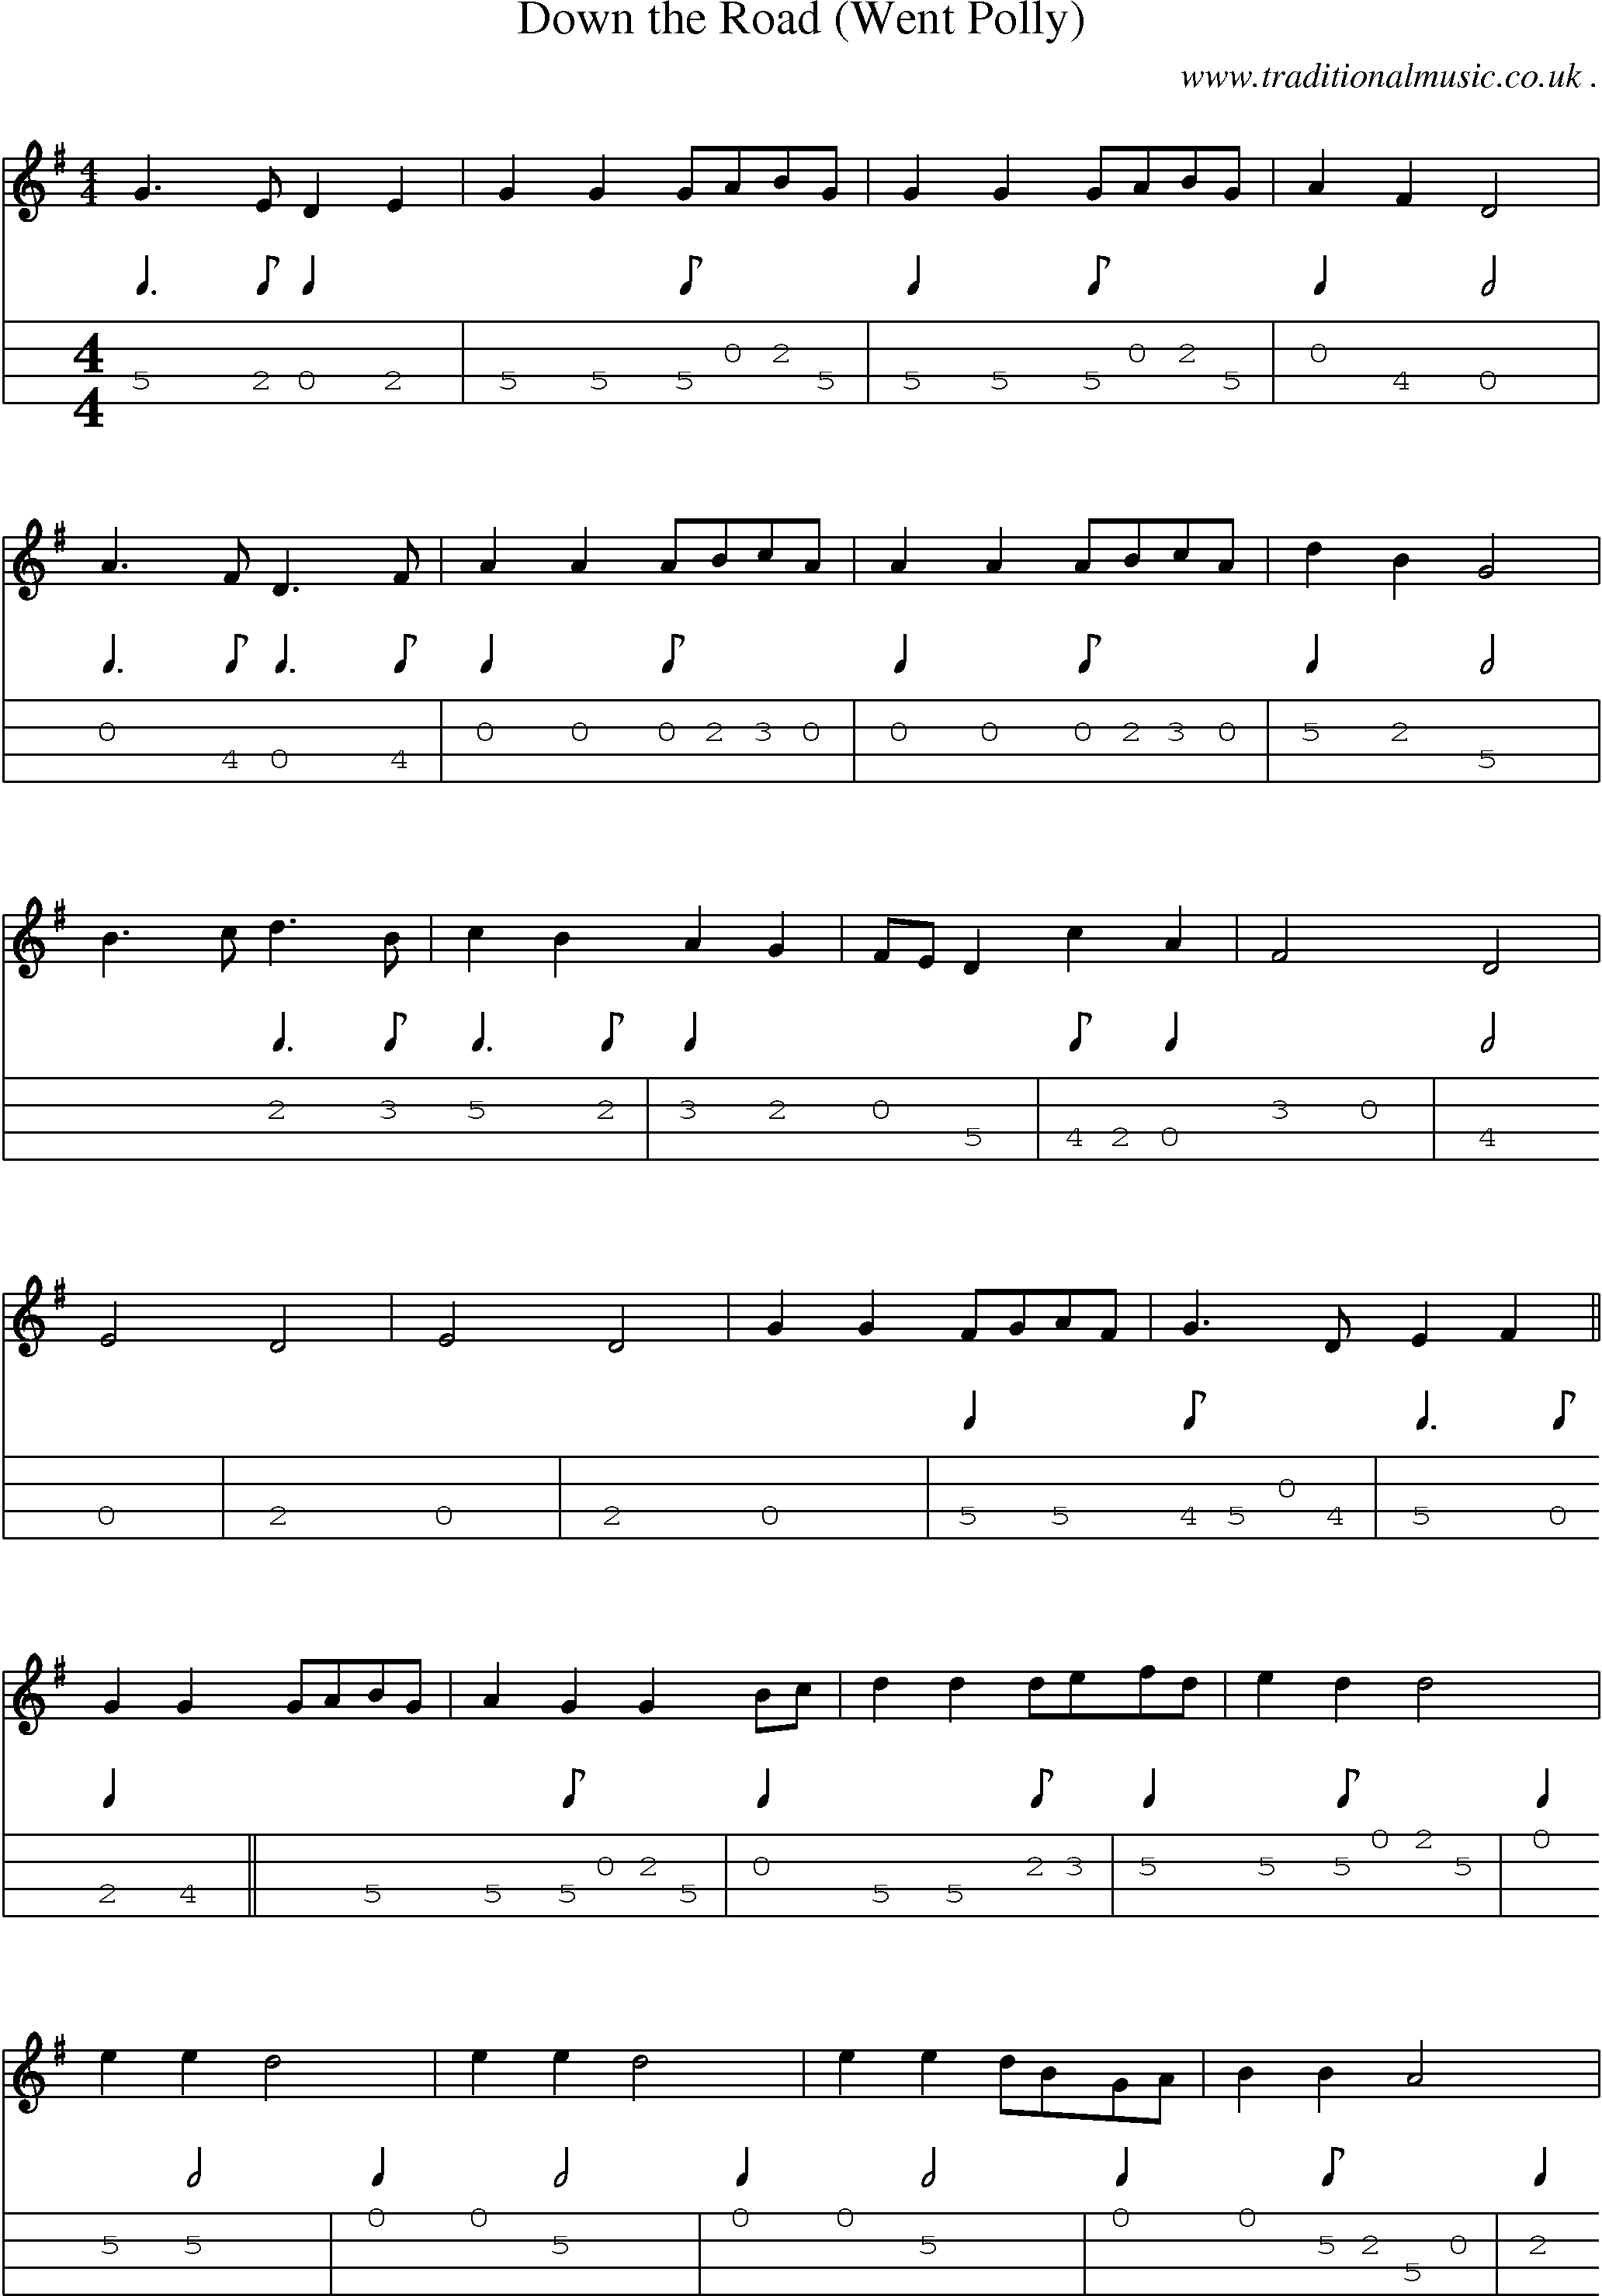 Sheet-music  score, Chords and Mandolin Tabs for Down The Road Went Polly